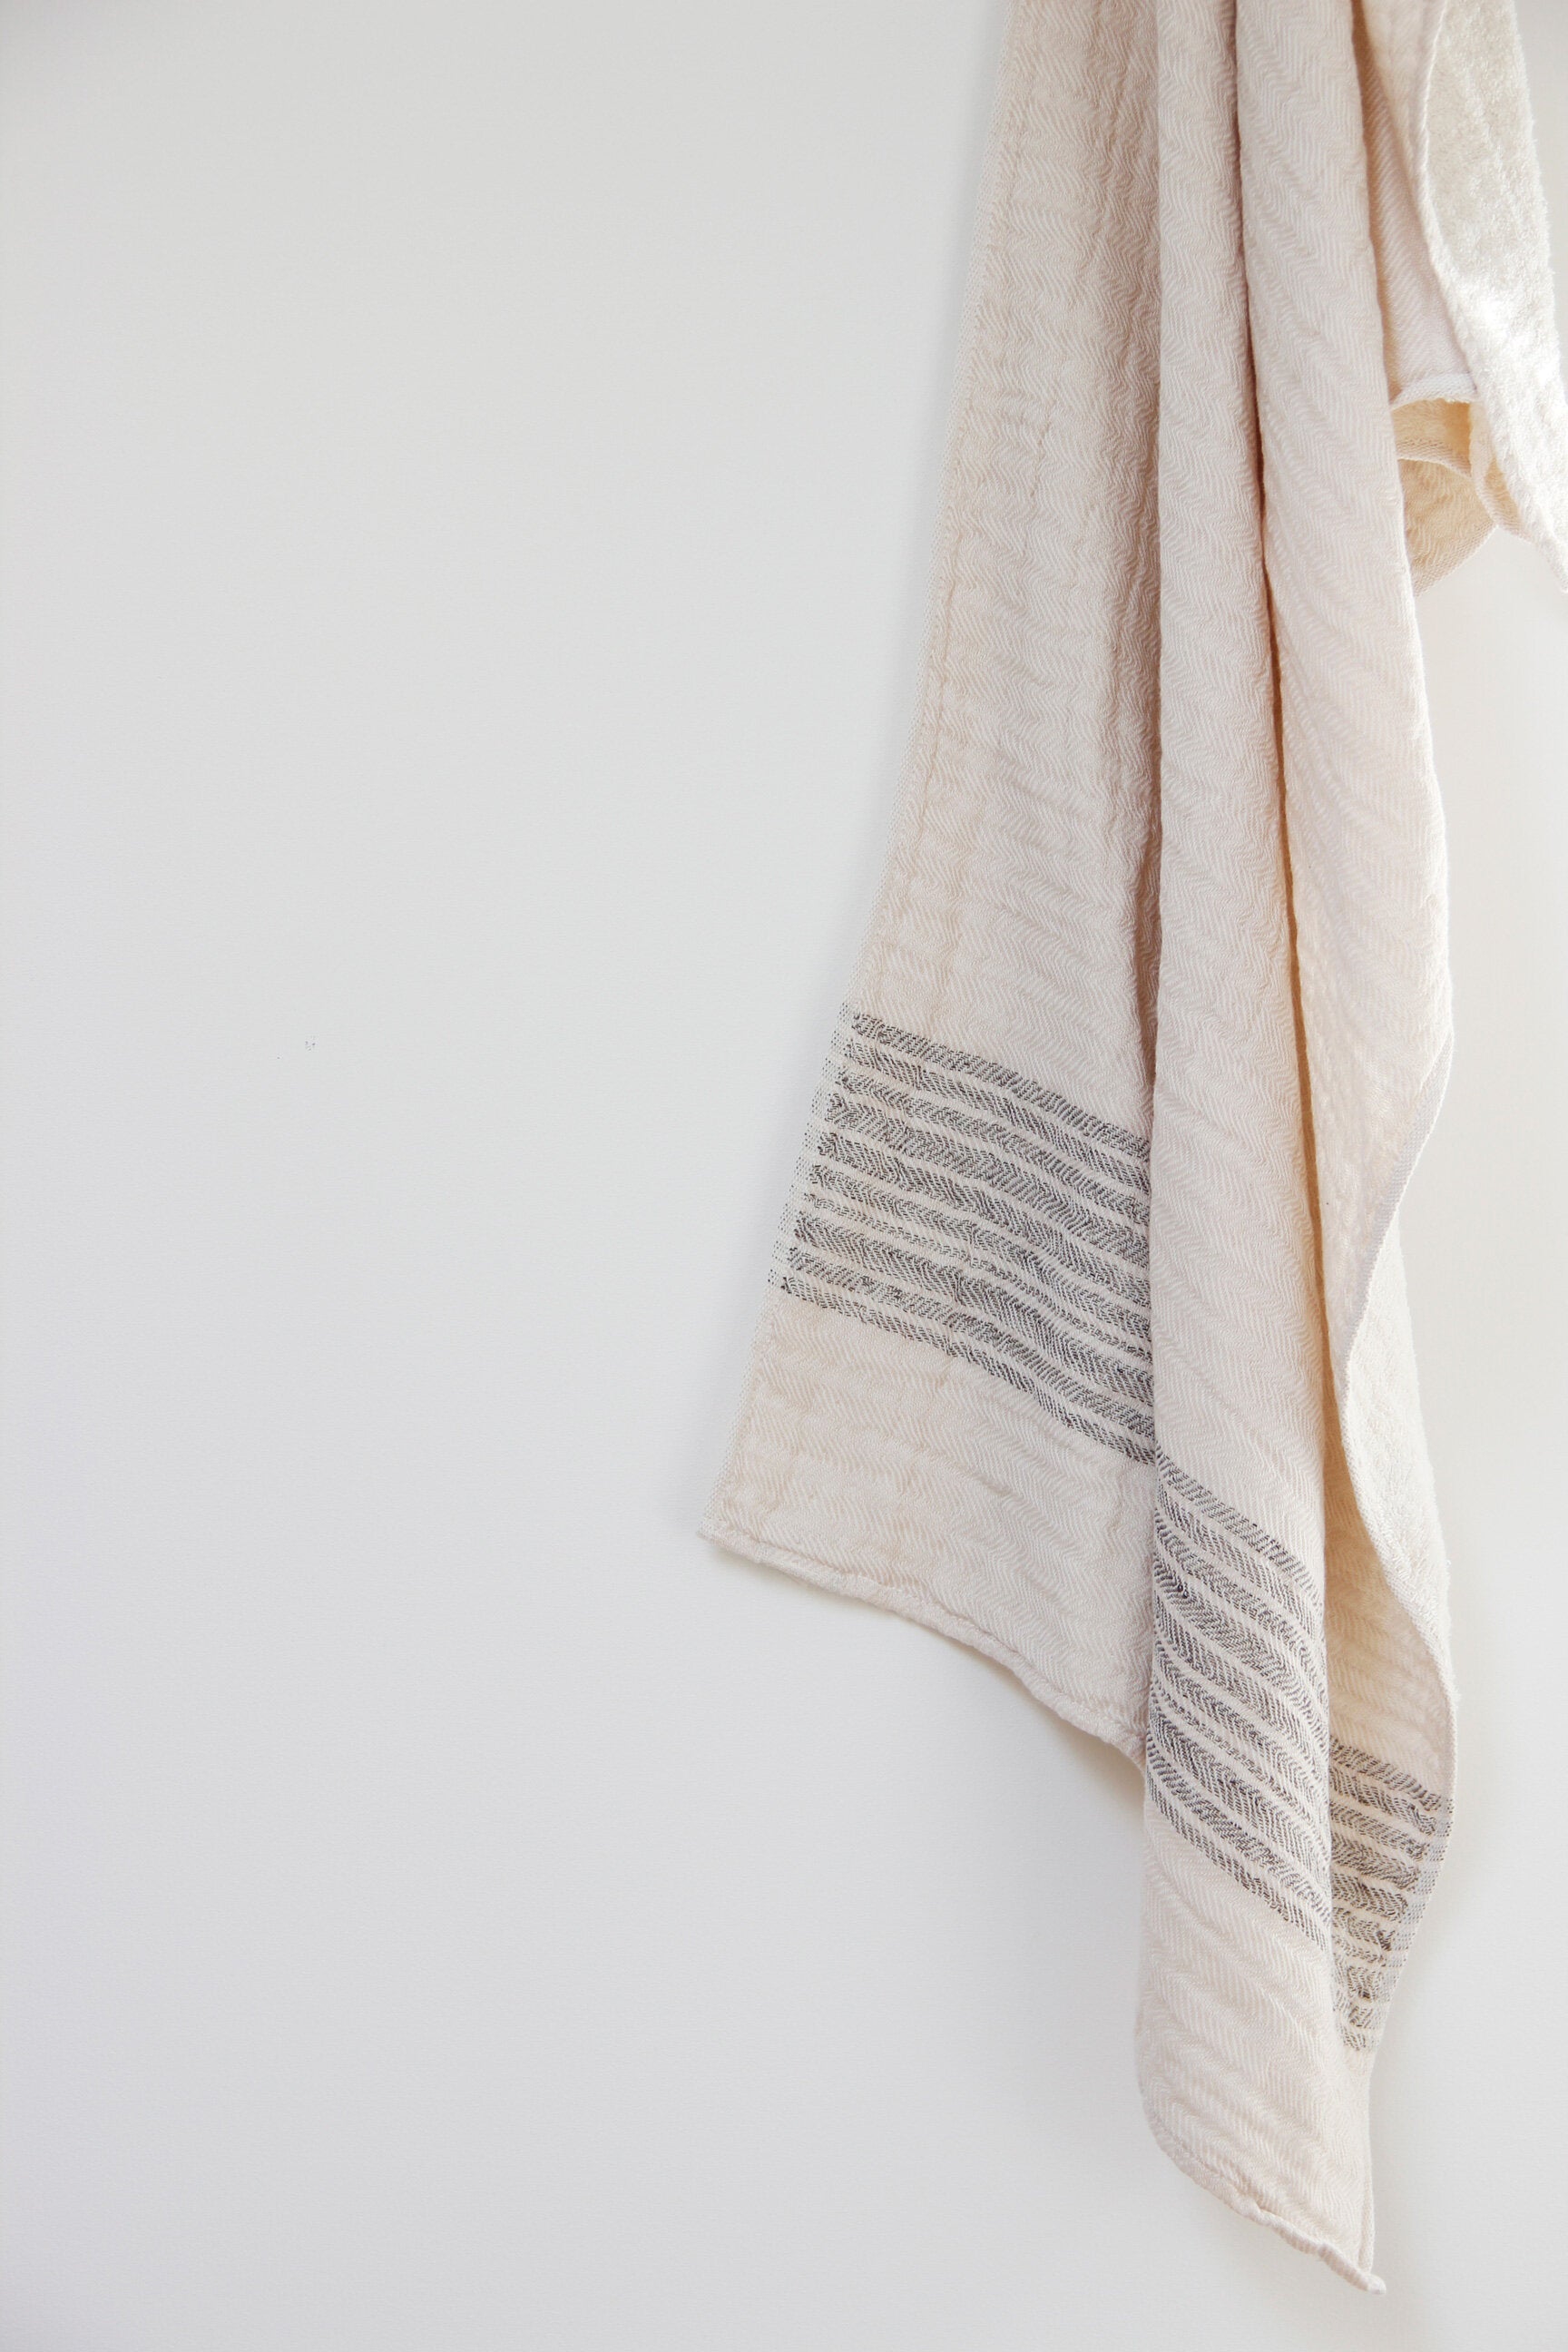 Flax - Cotton Terry Towel